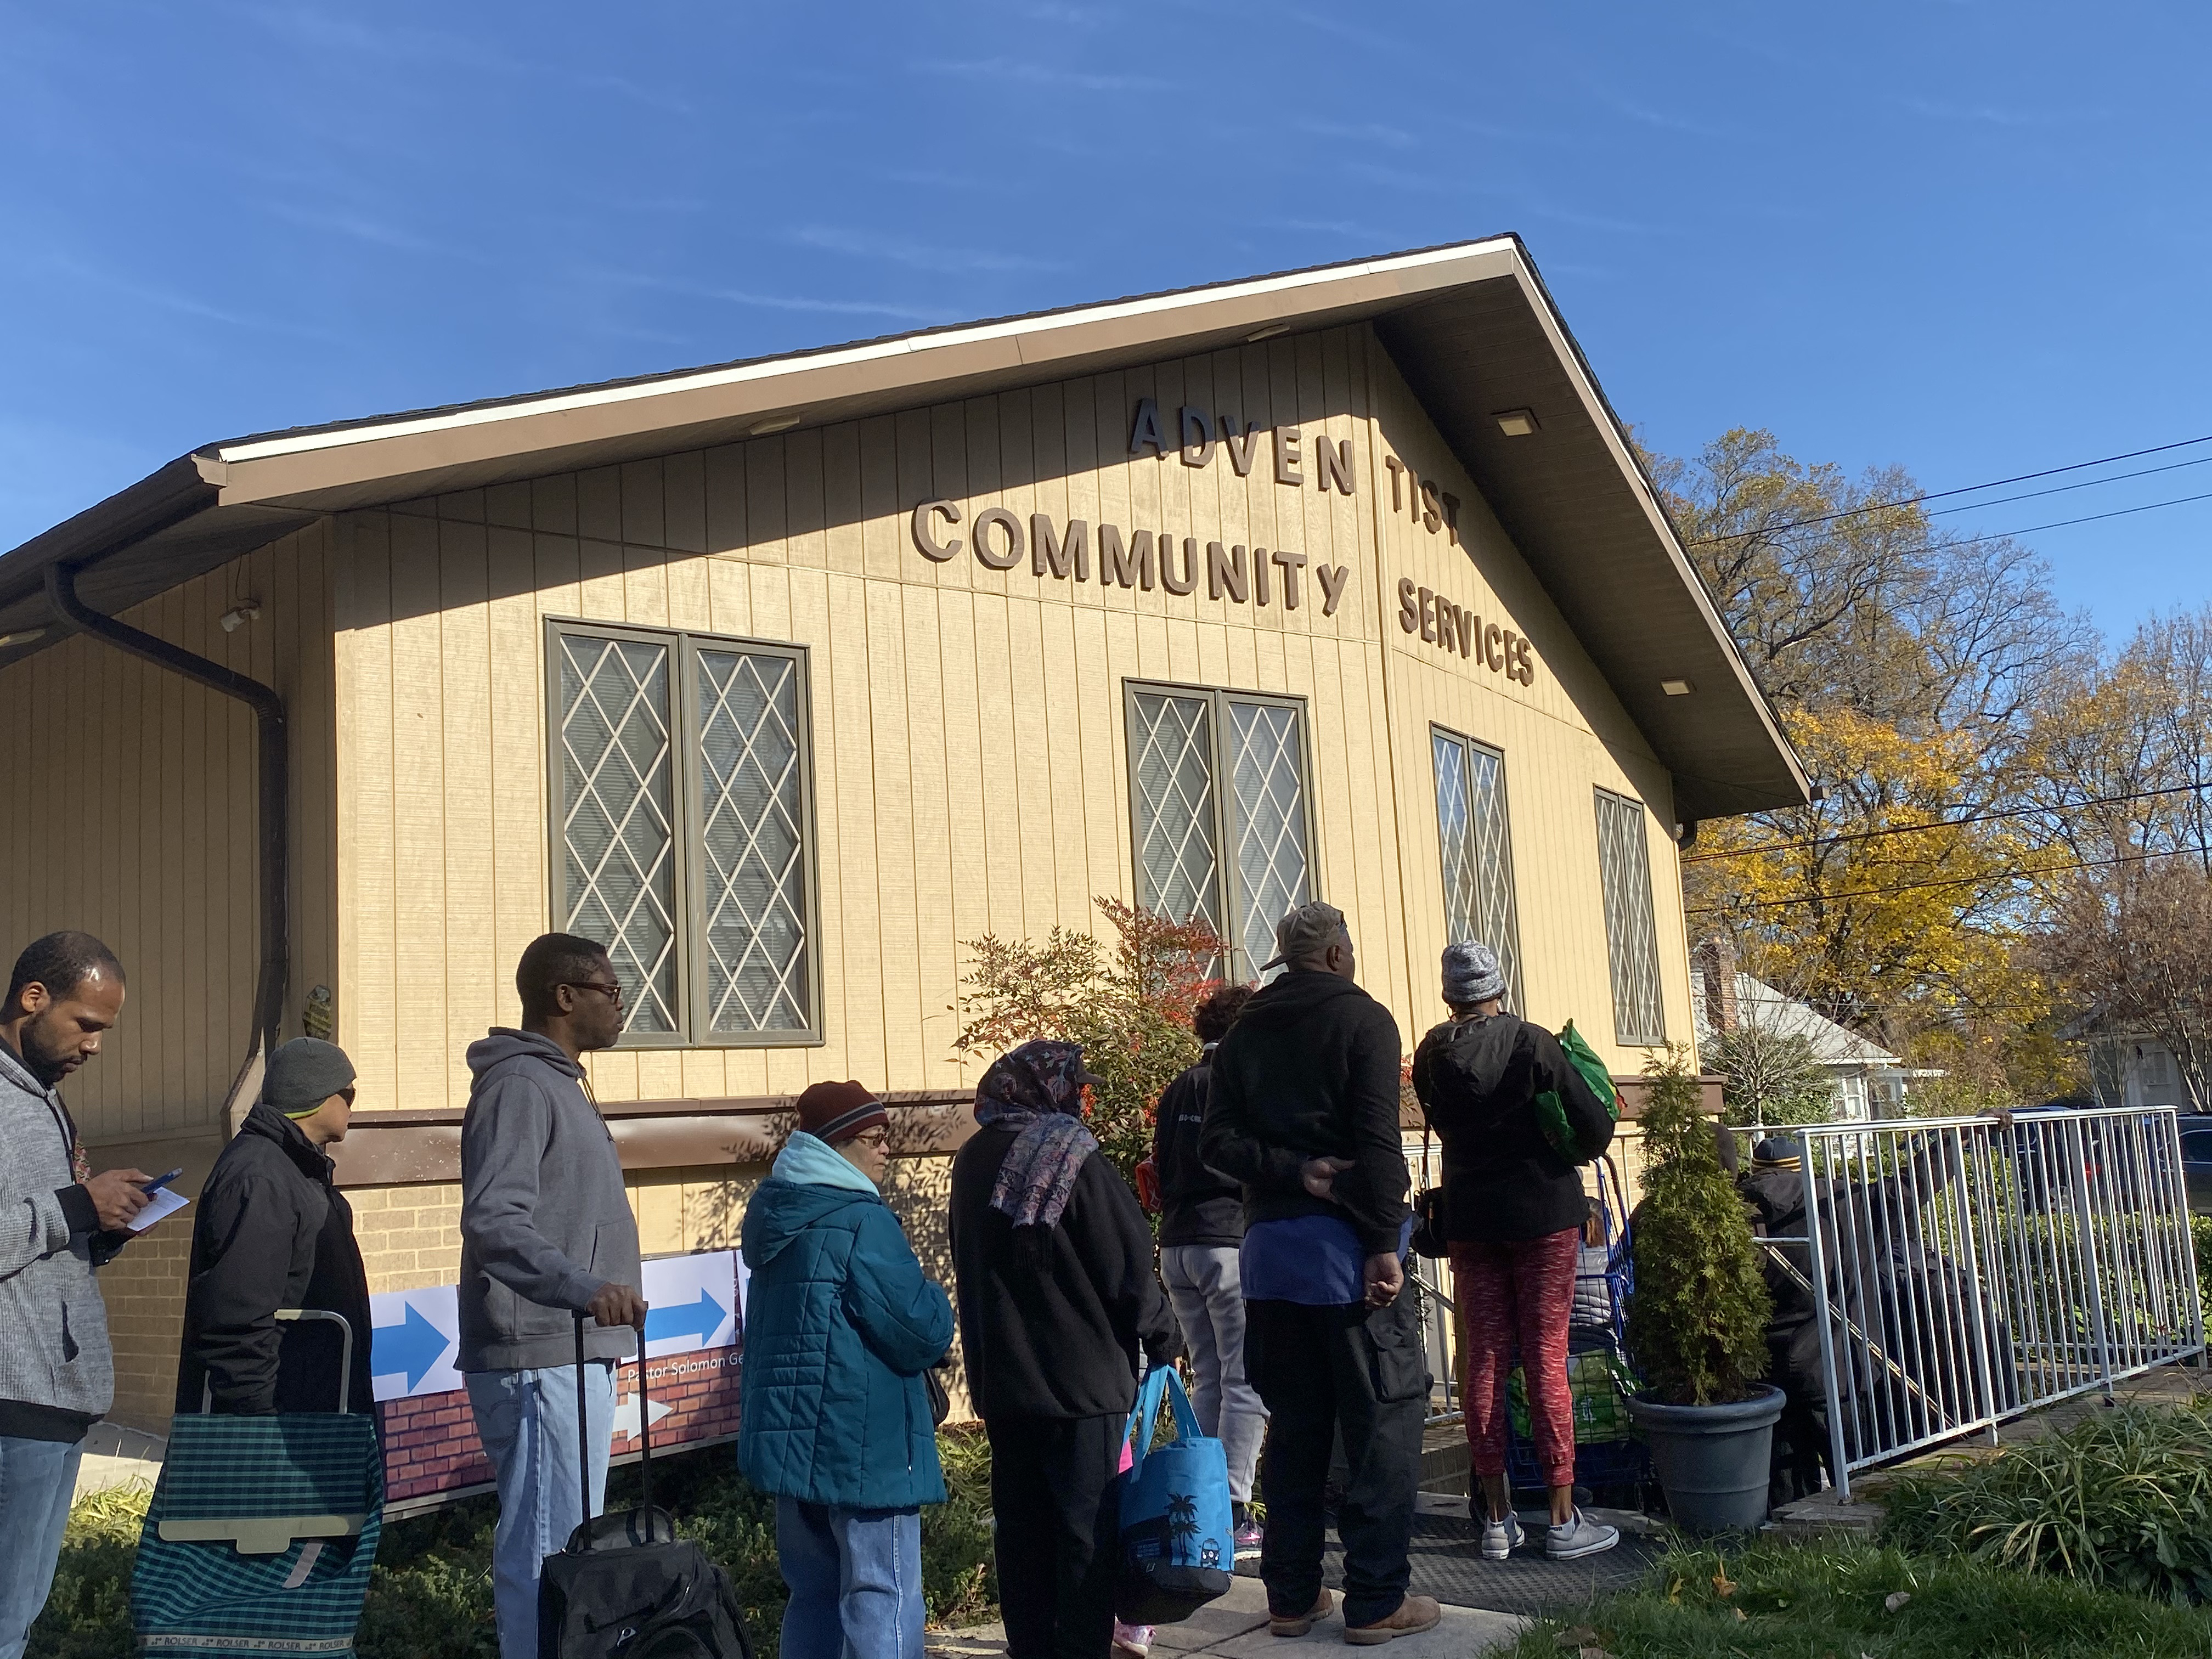 Food basket recipients line up to receive their Thanksgiving meal kit at the Adventist Community Services of Greater Washington location on the border of Takoma Park and Silver Spring, Maryland, on Nov. 25, 2019.